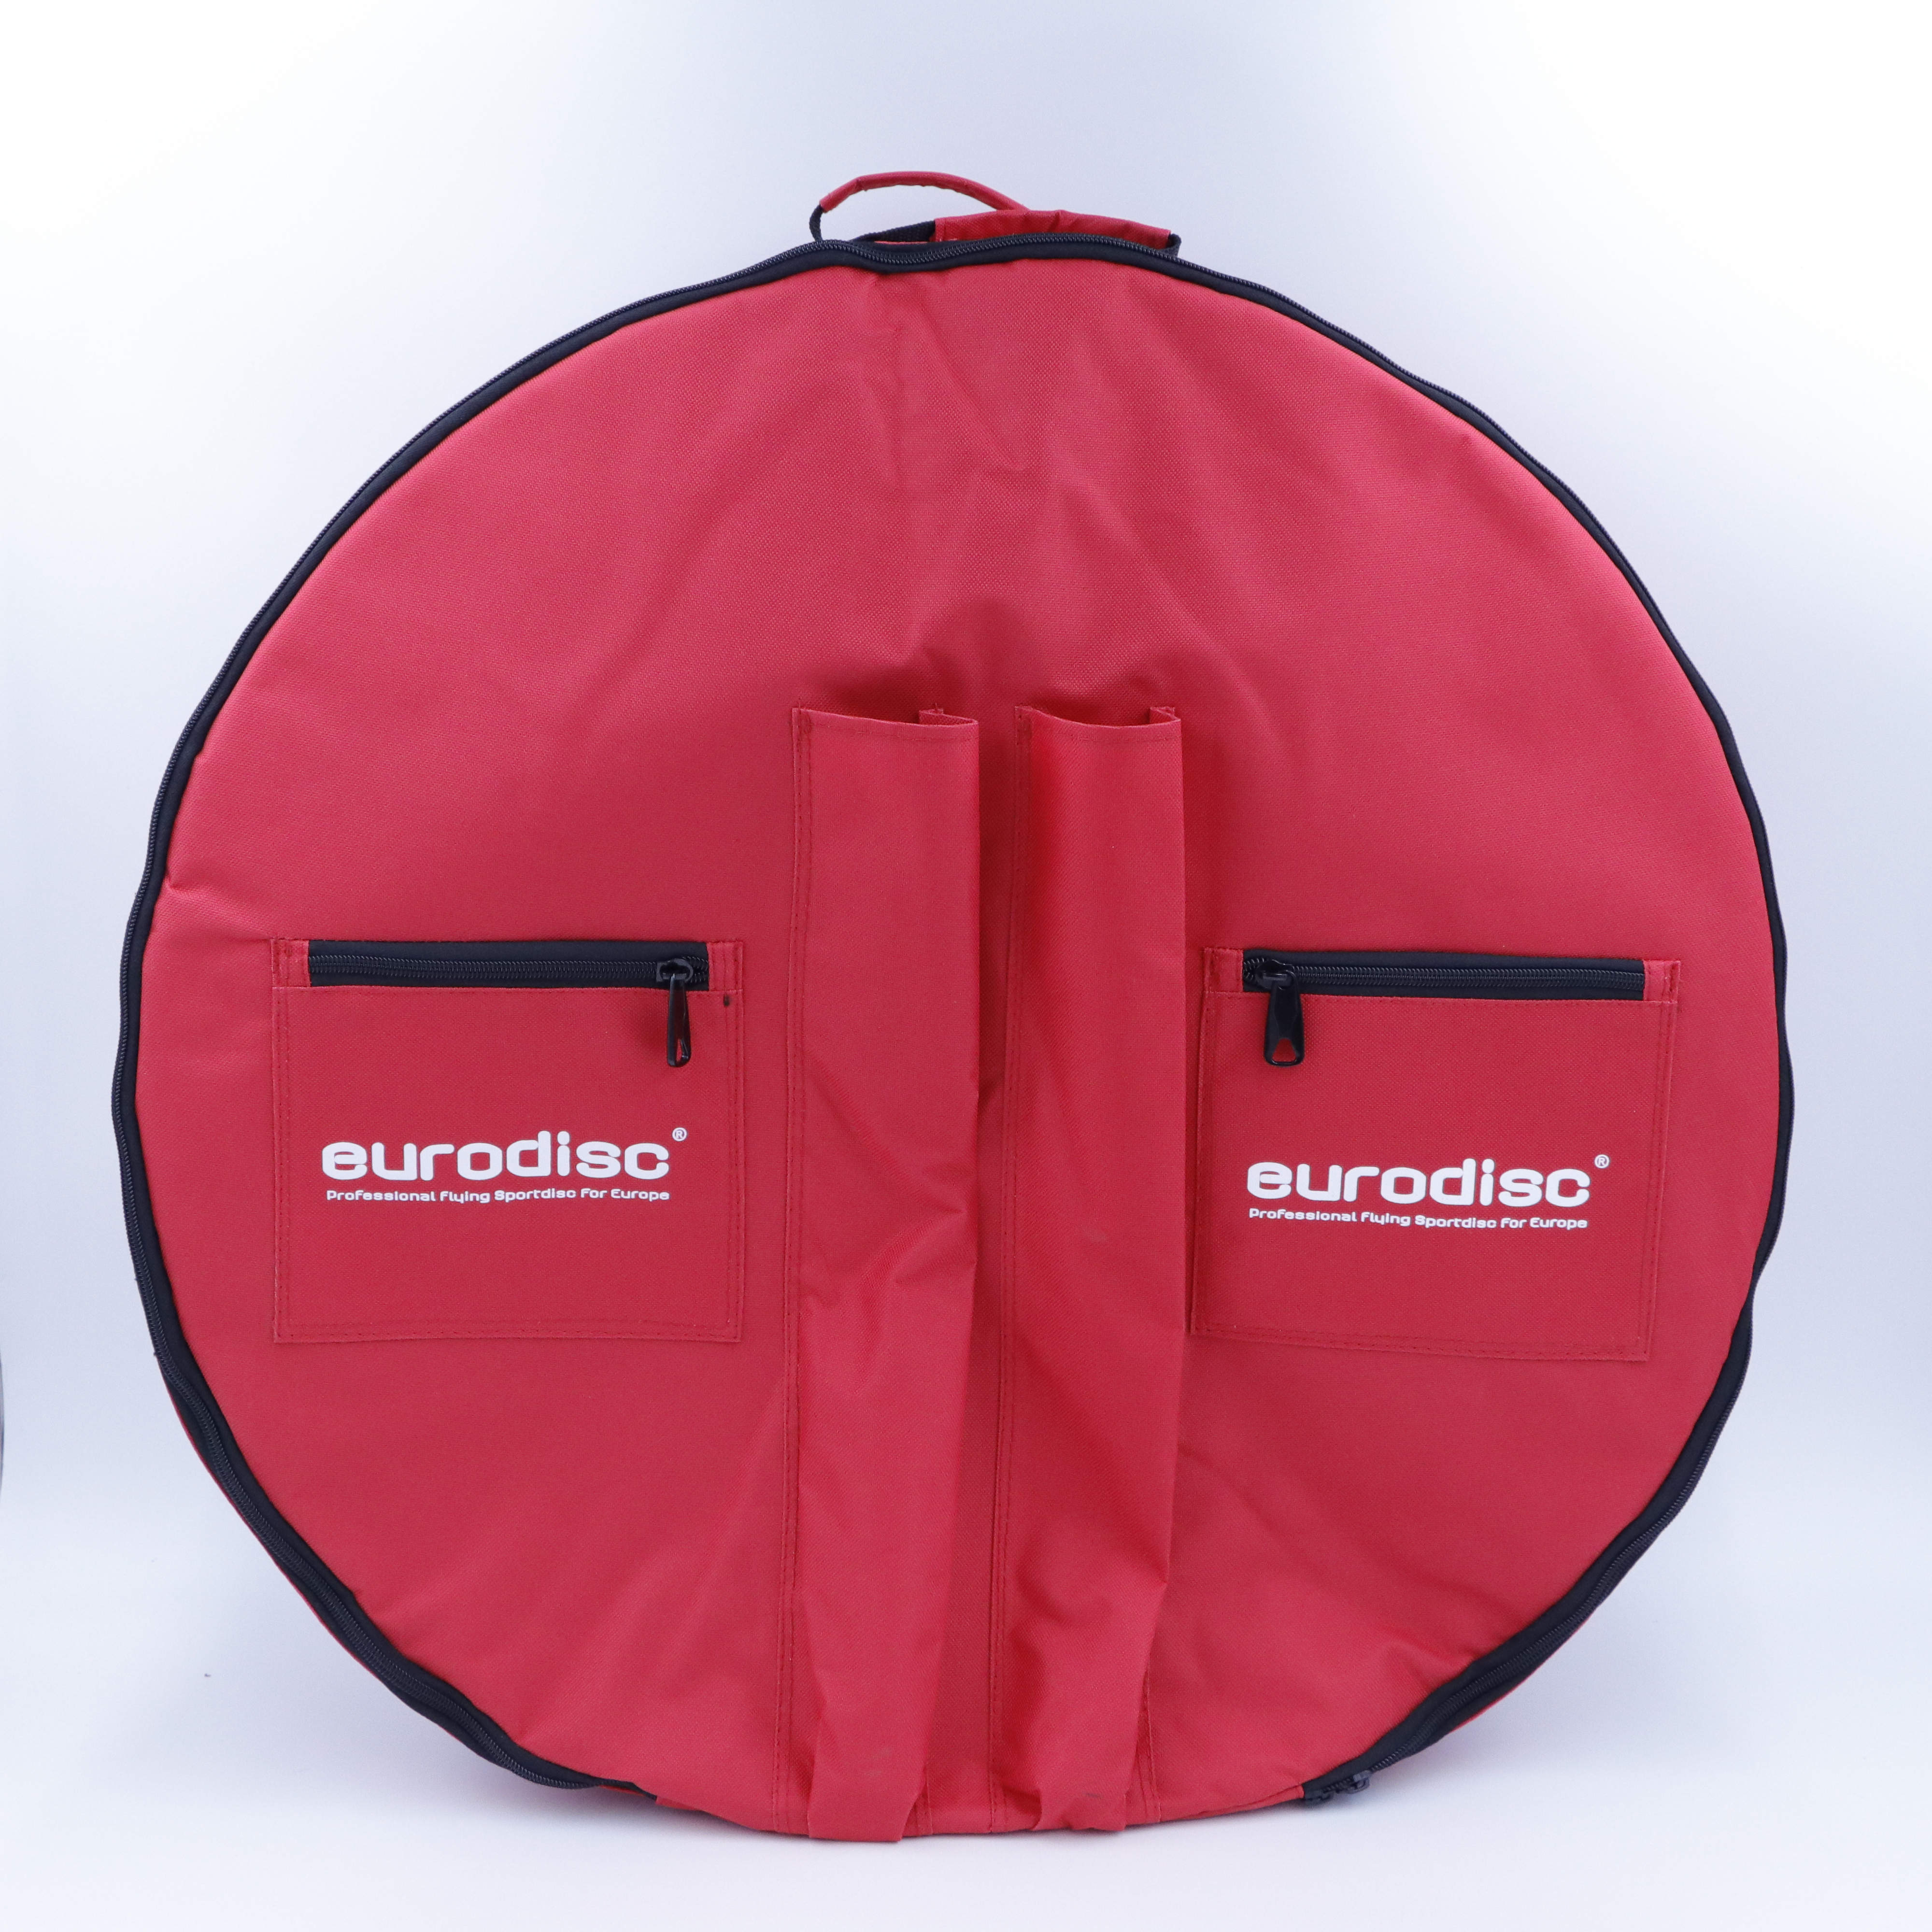 eurodisc Backpack Red, especially for the DLC Discgolf Target